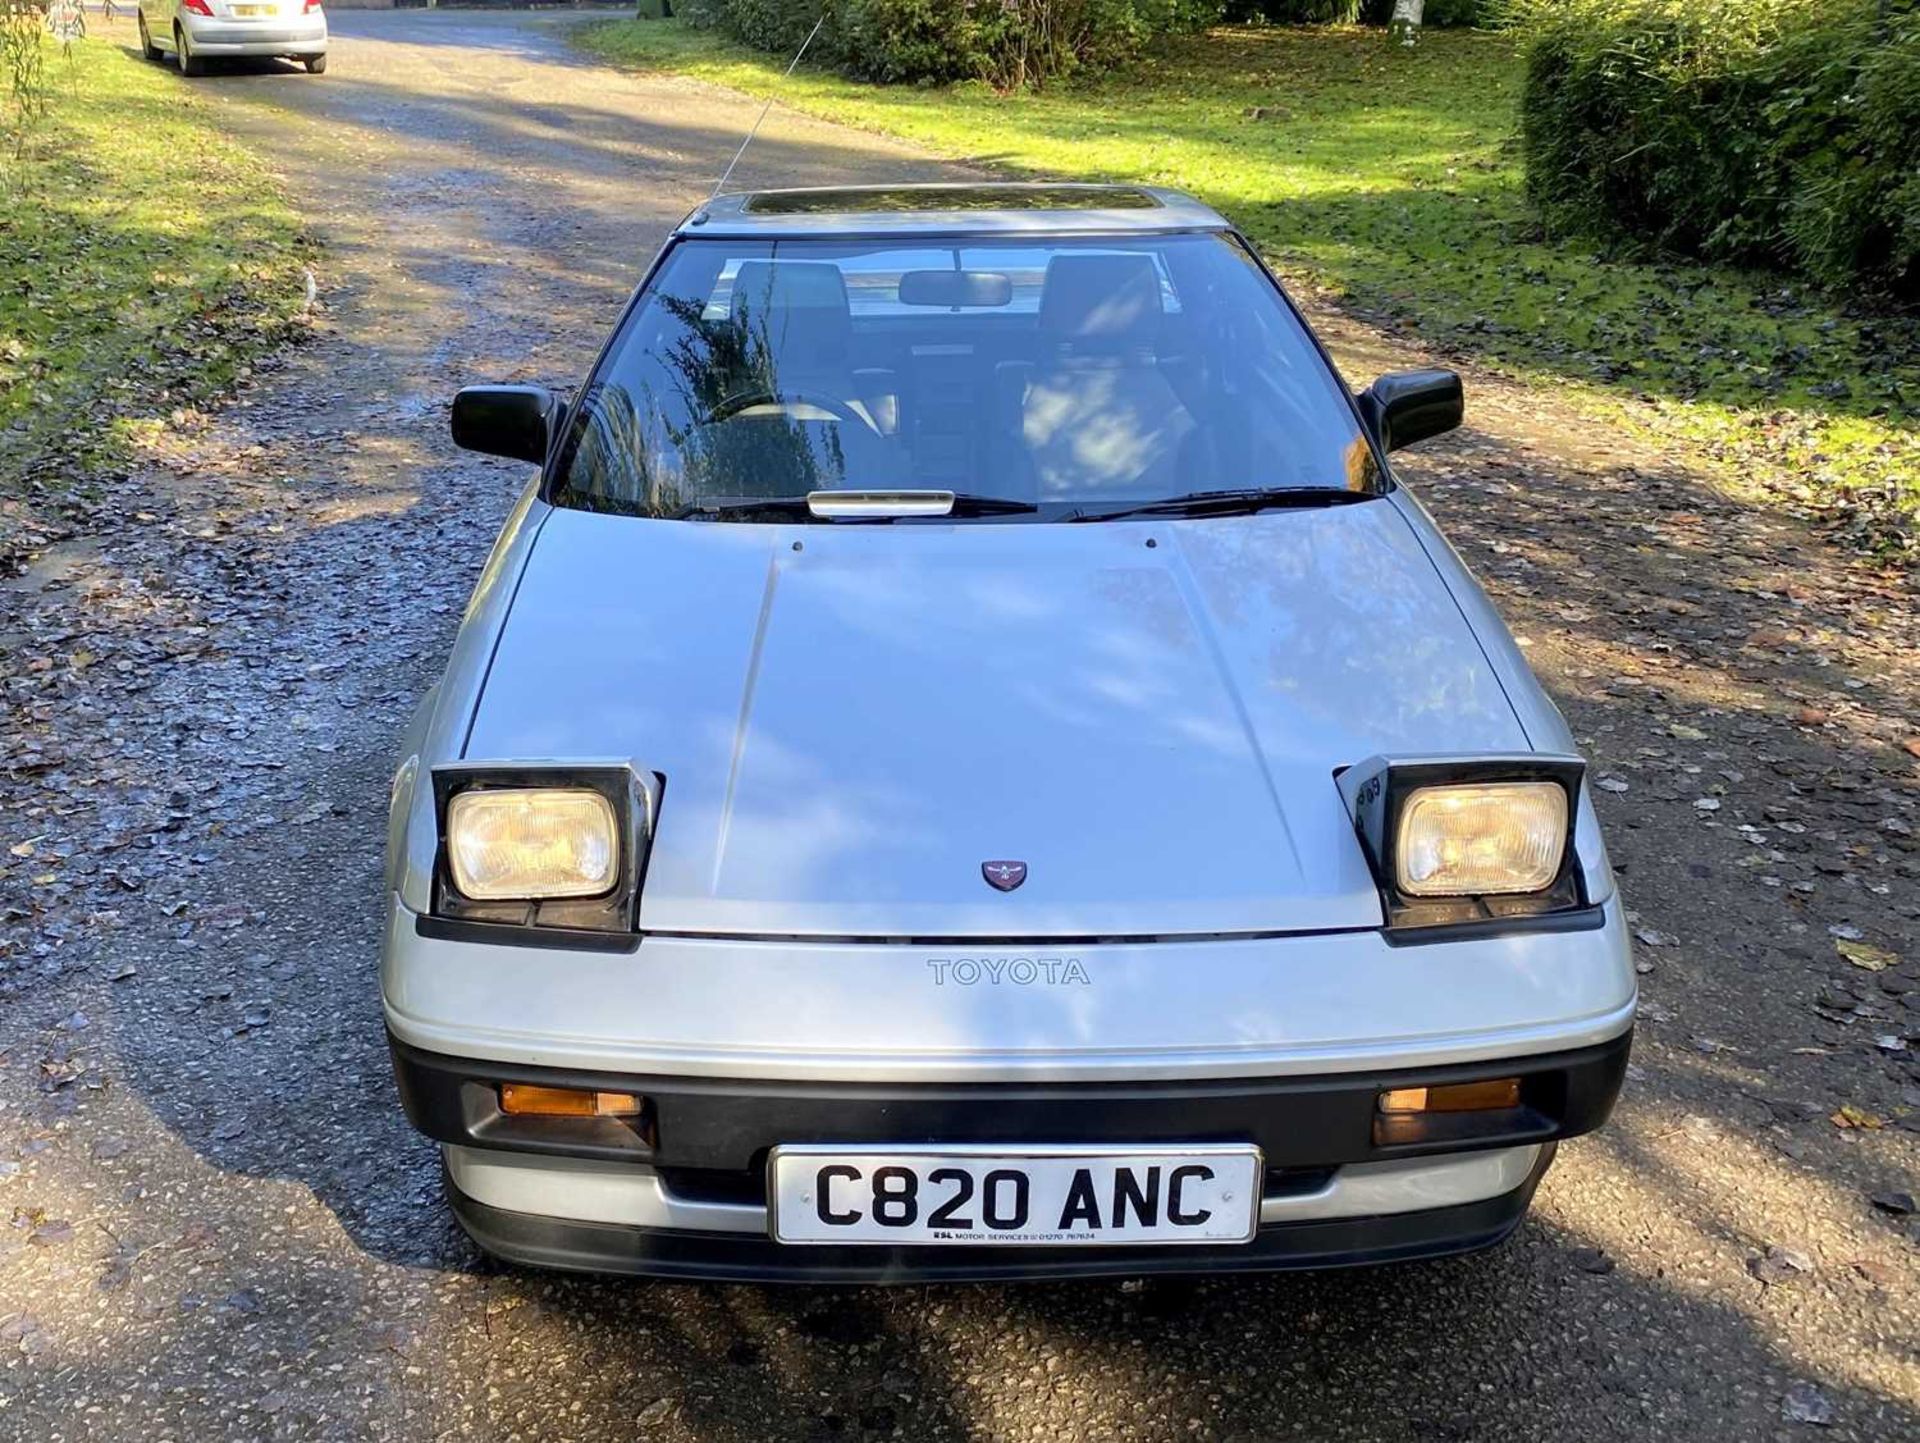 1985 Toyota MR2 Coupe Restored example of an appreciating modern classic - Image 16 of 100